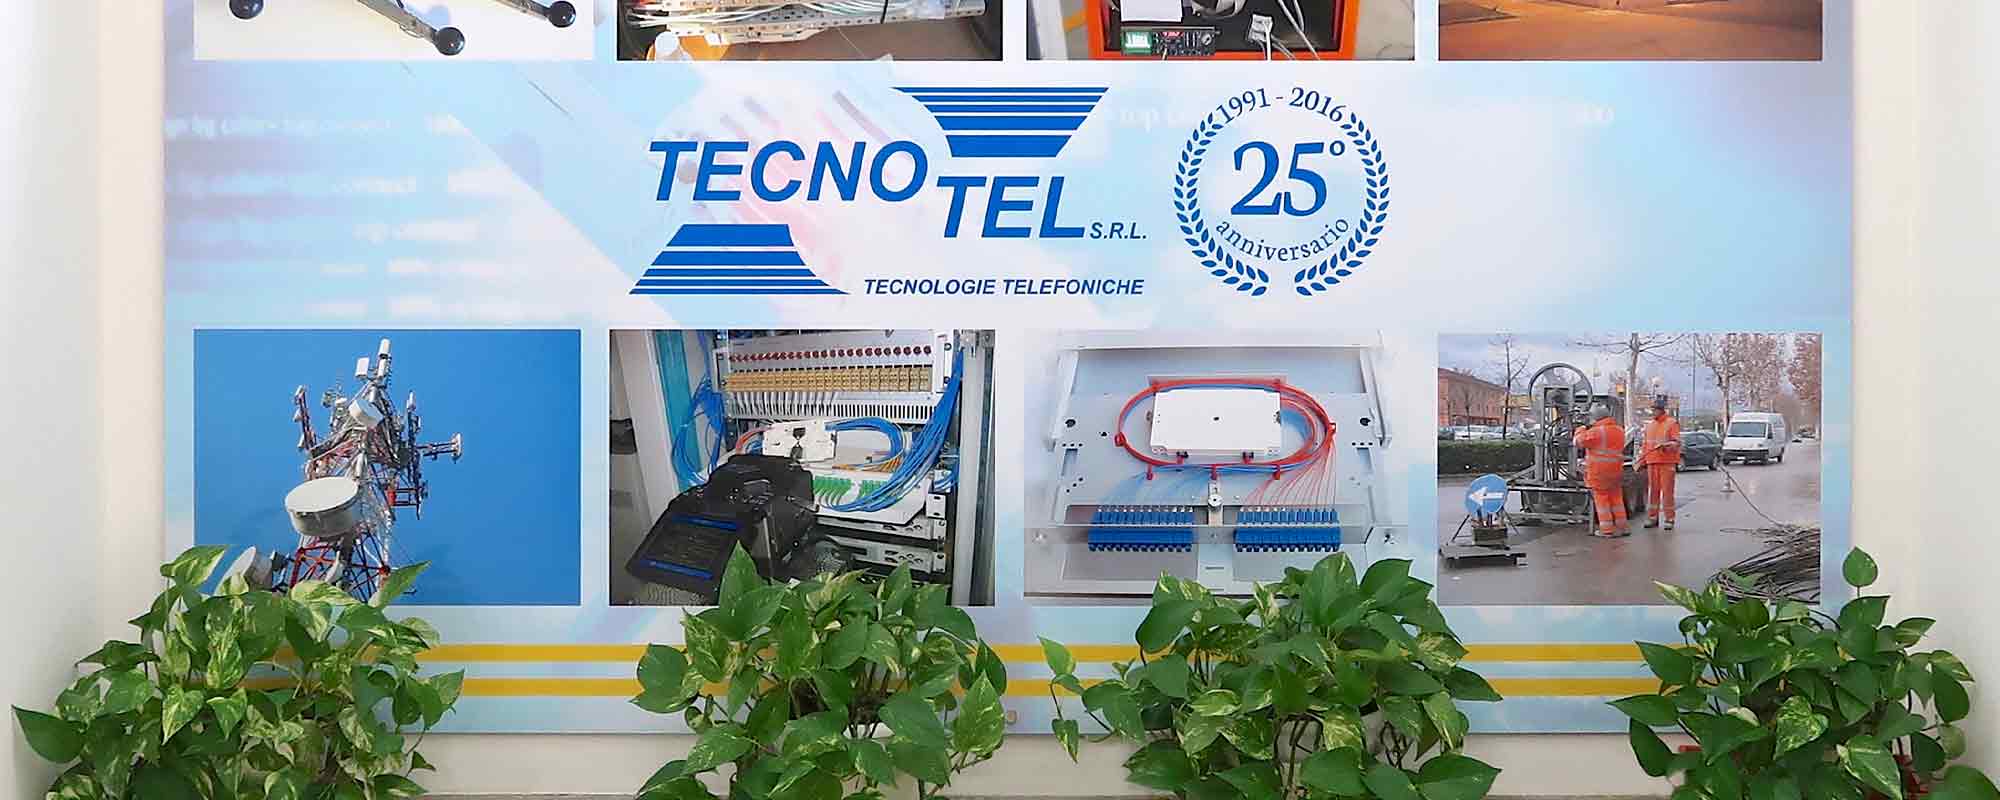 Since 1991, technologies, products and services for telecommunications